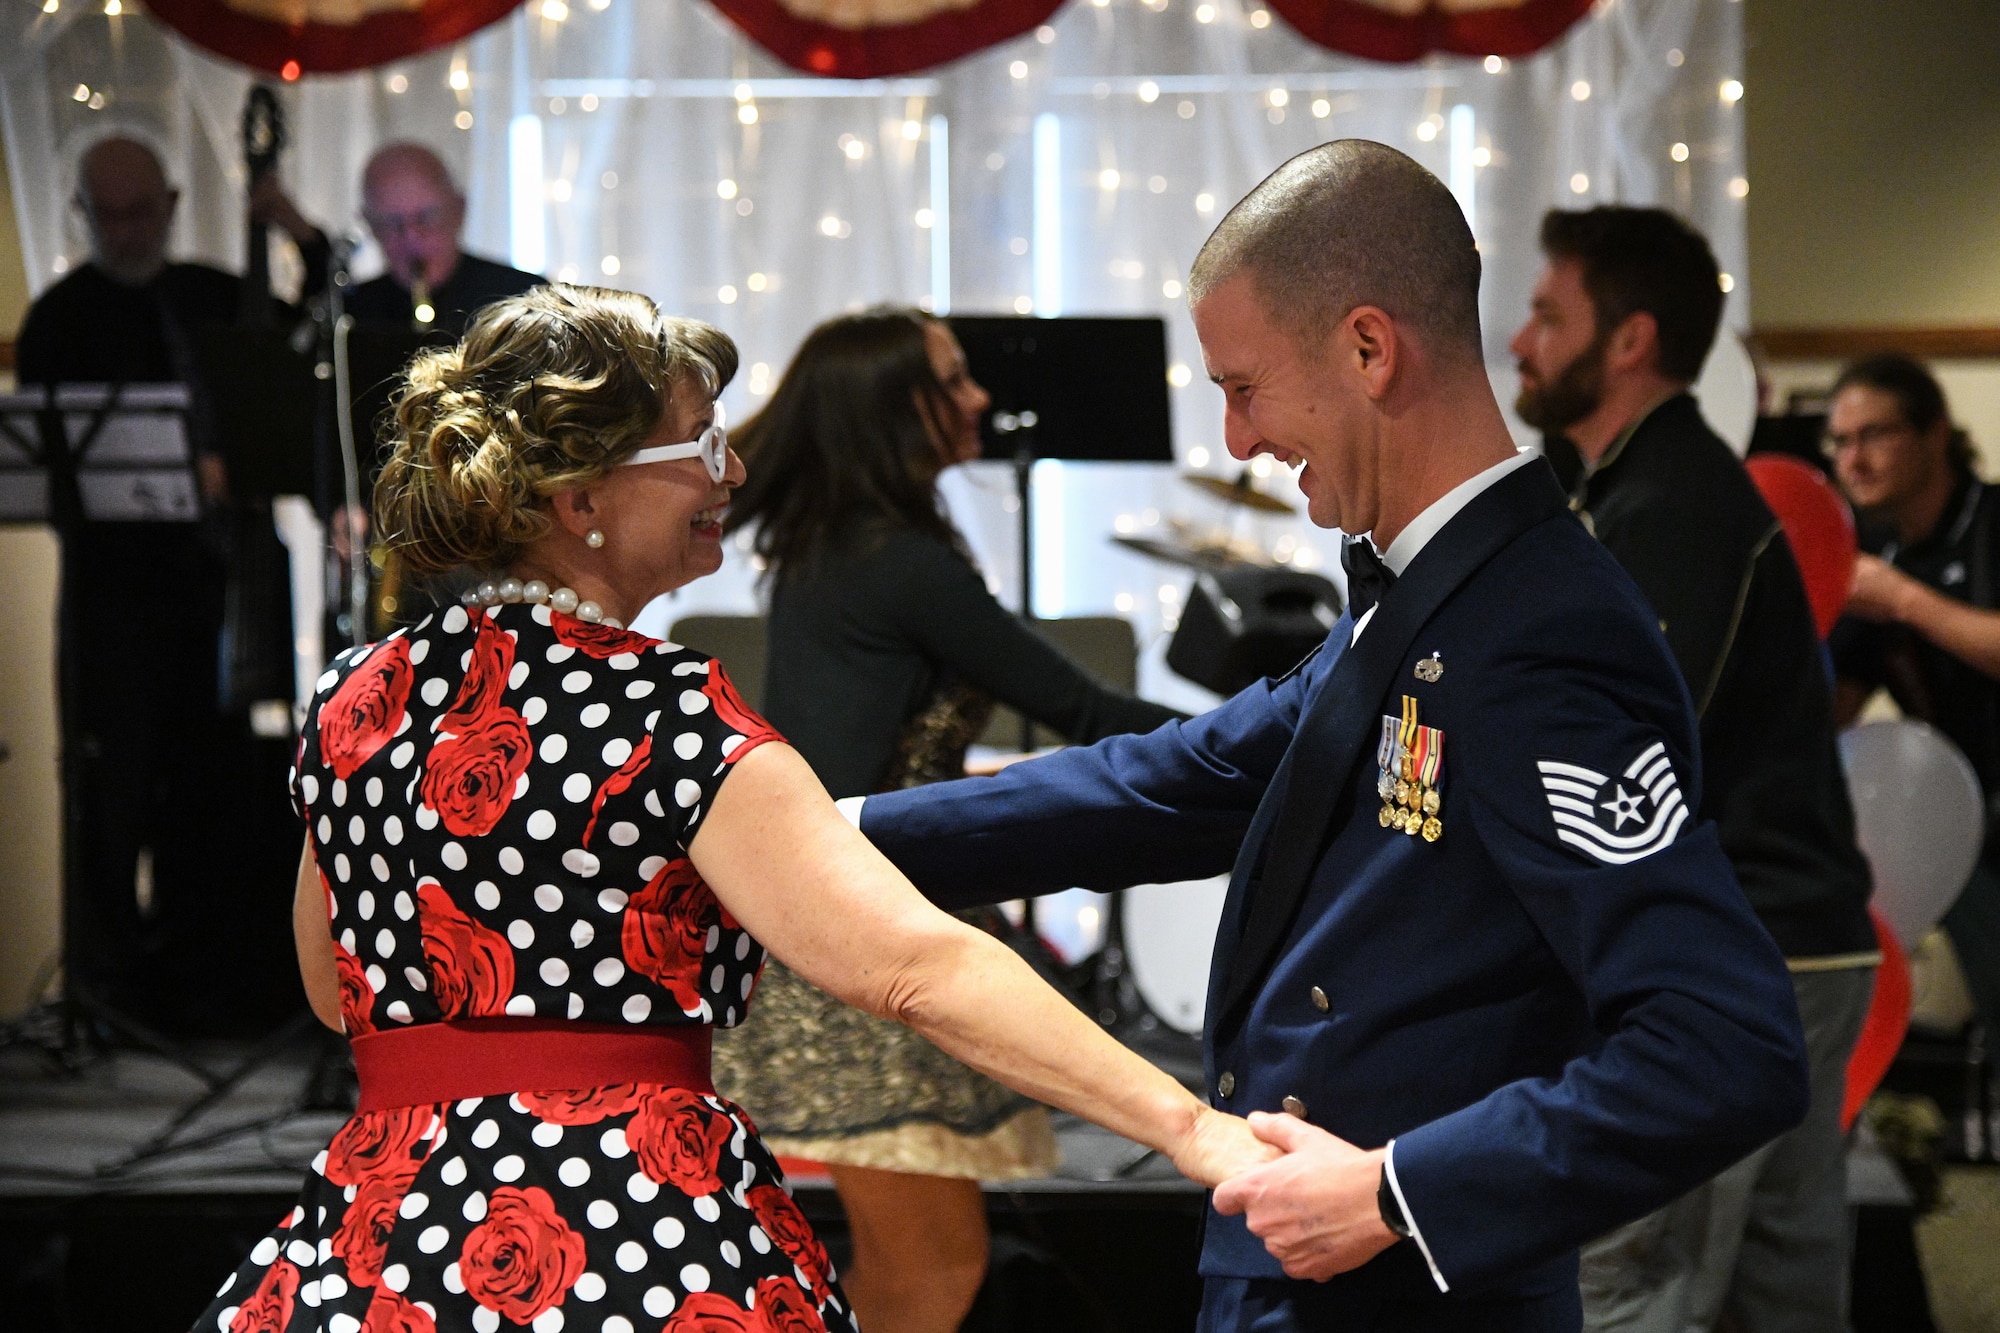 Tech. Sgt. Scott Patteson dances with Julie Hayes, facility recreation director, during a Valentine's Day dance held at the George E. Wahlen Veterans Home in Ogden, Utah, Feb. 14, 2018. (U.S. Air Force photo by R. Nial Bradshaw)